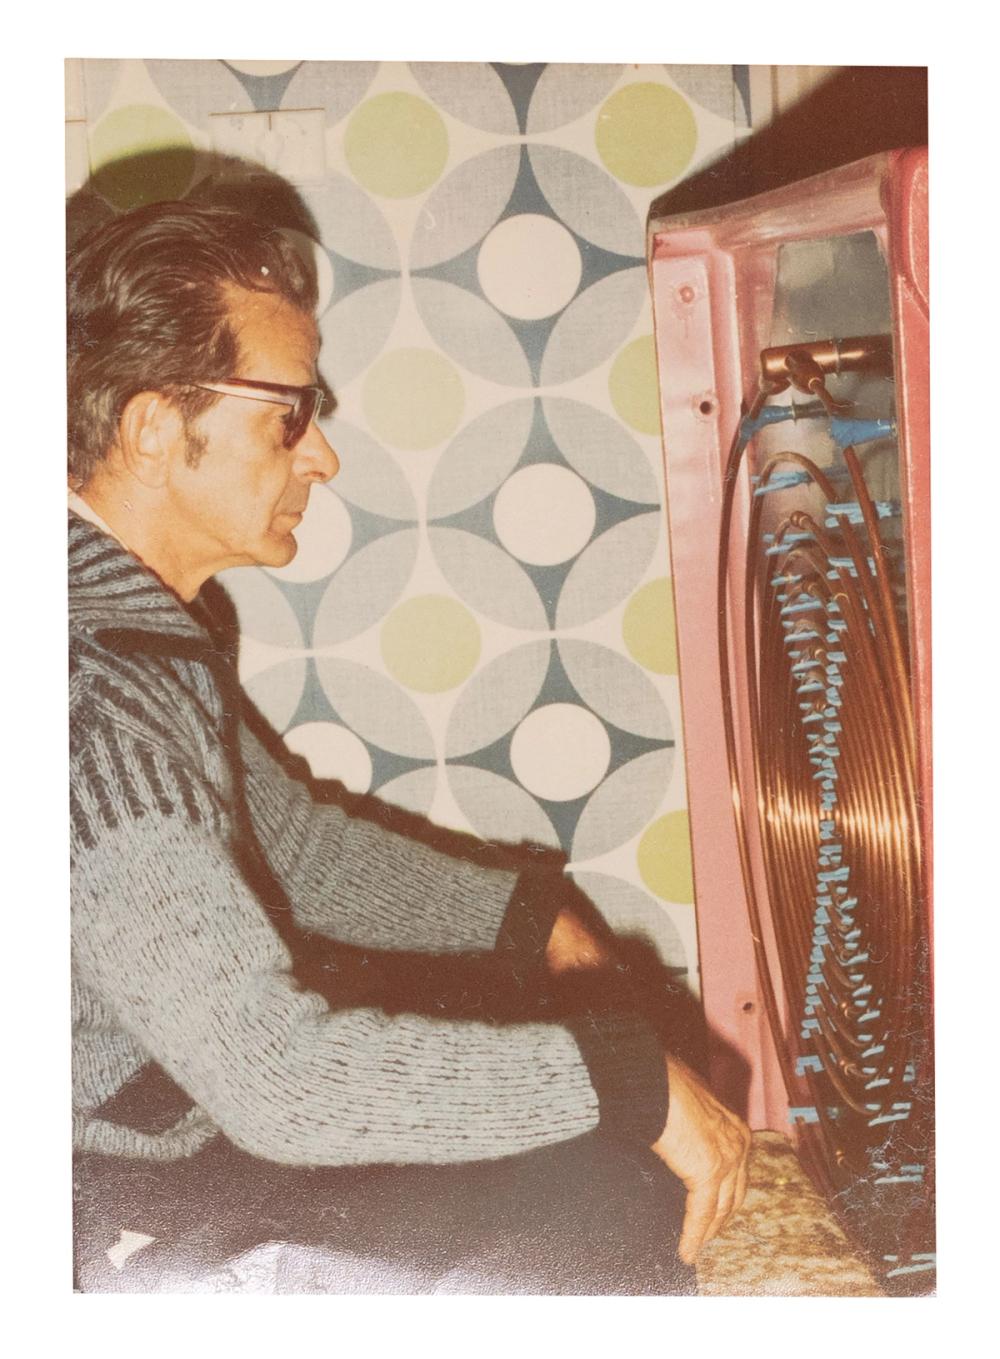 A man sitting in front of a oscillator machine and looking at it.